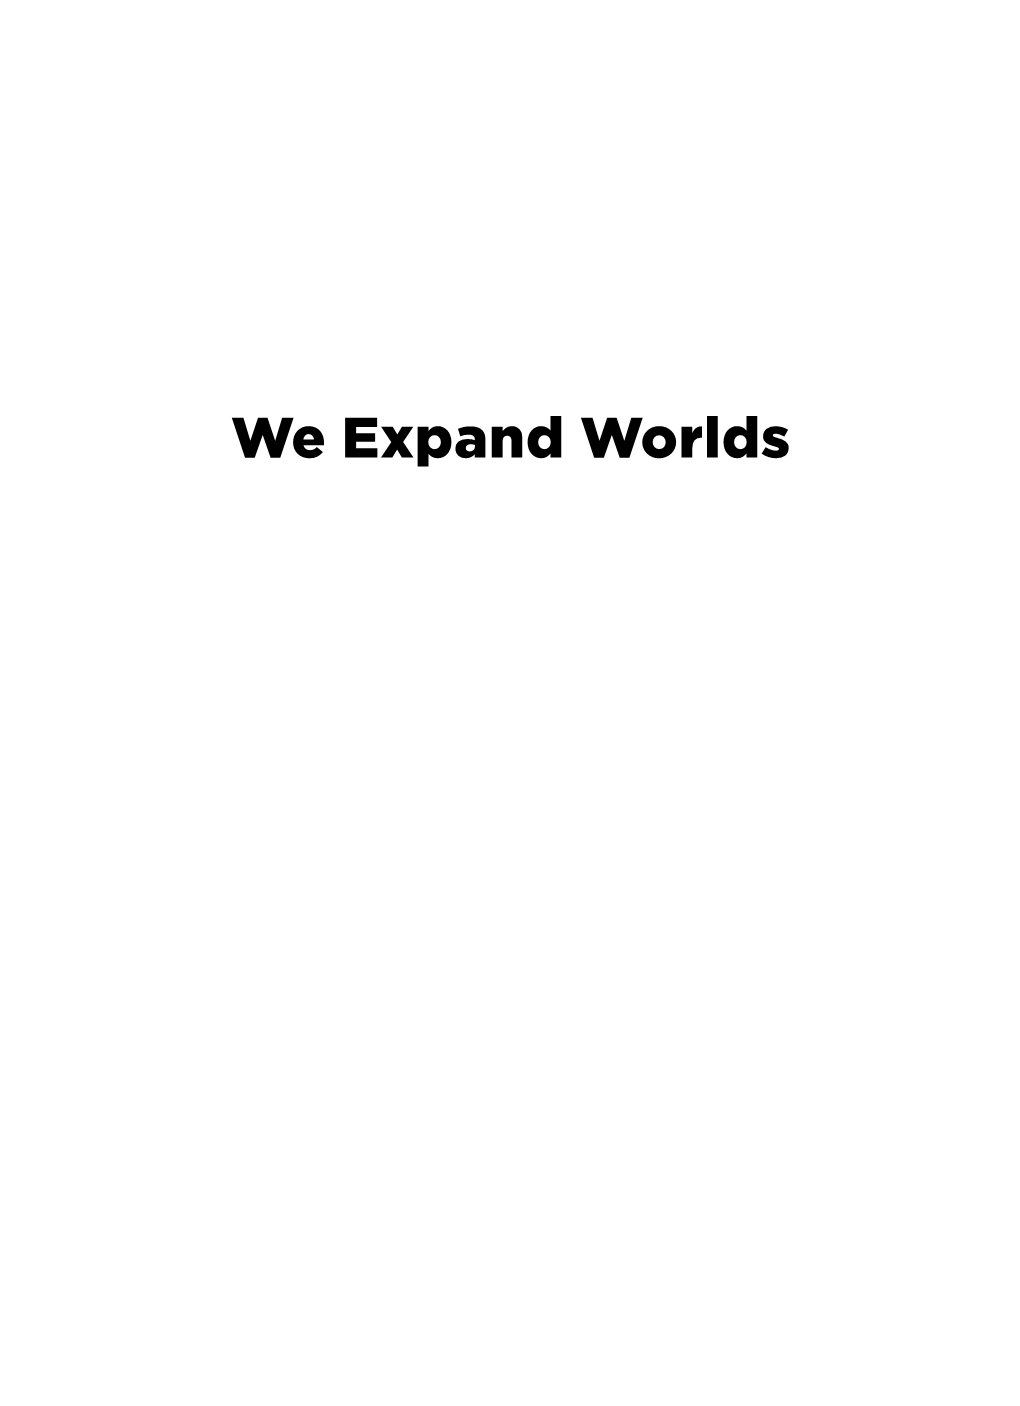 We Expand Worlds